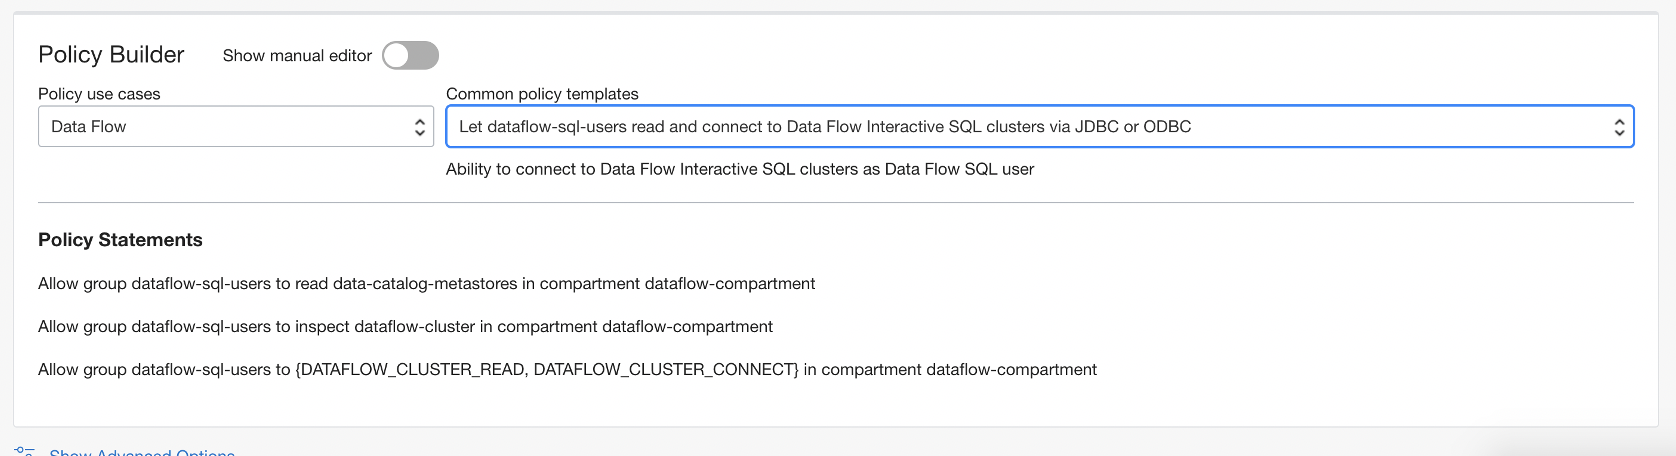 The policy Let dataflow-sql-users read and connect to Data Flow Interactive SQL clusters via JDBC or ODBC is selected, and the policy statements for it are displayed.